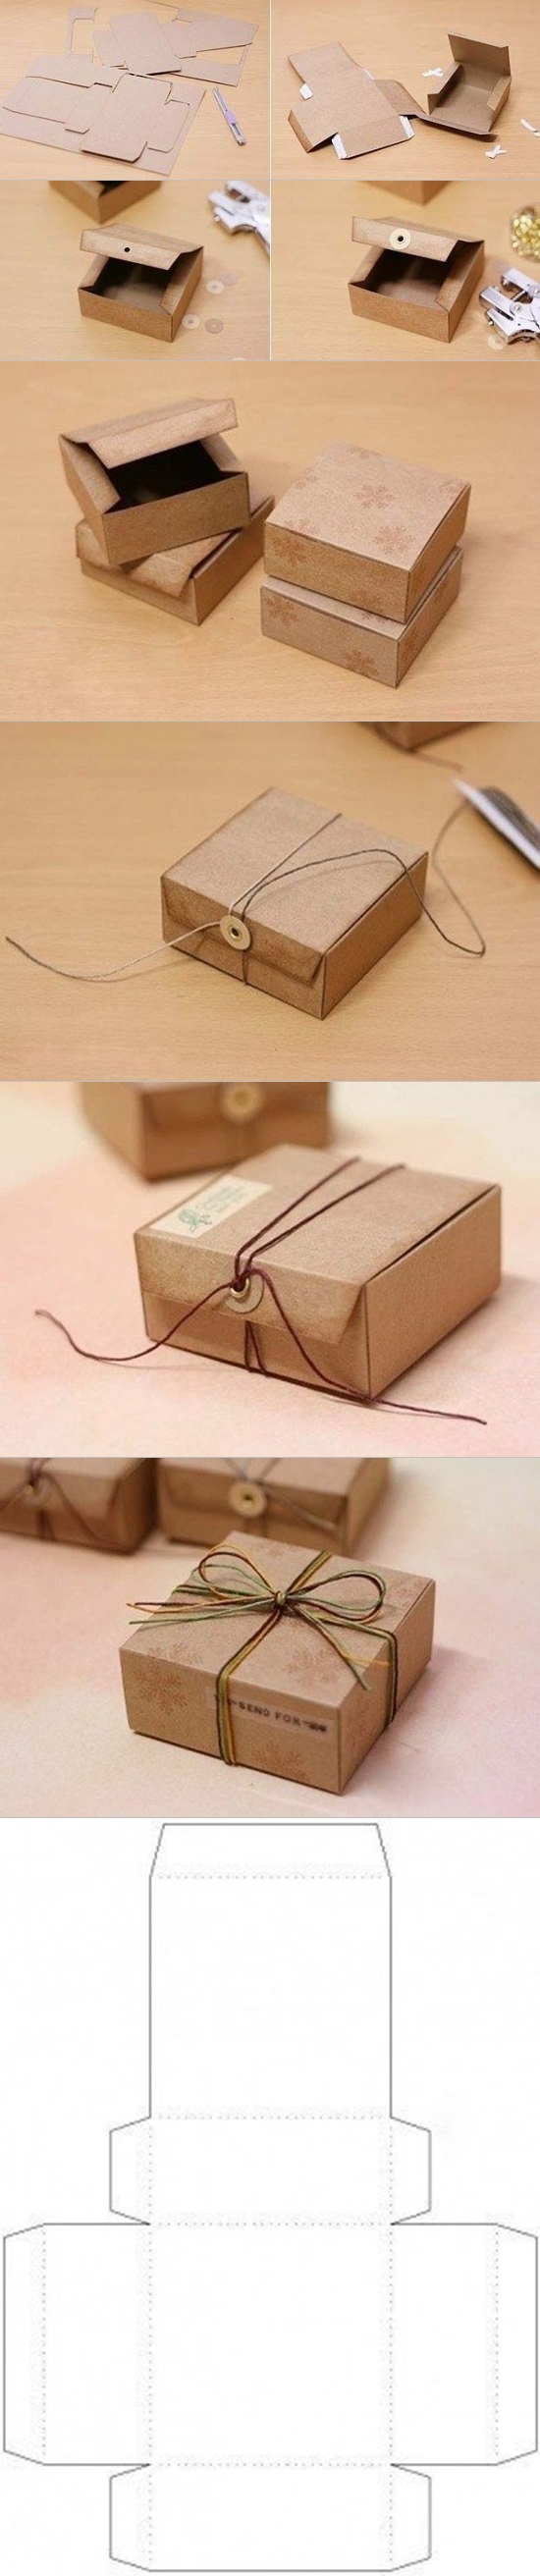 DIY gift box. Gift box making ideas. How to make easy box for gifts -  tutorial. DIY paper crafts 